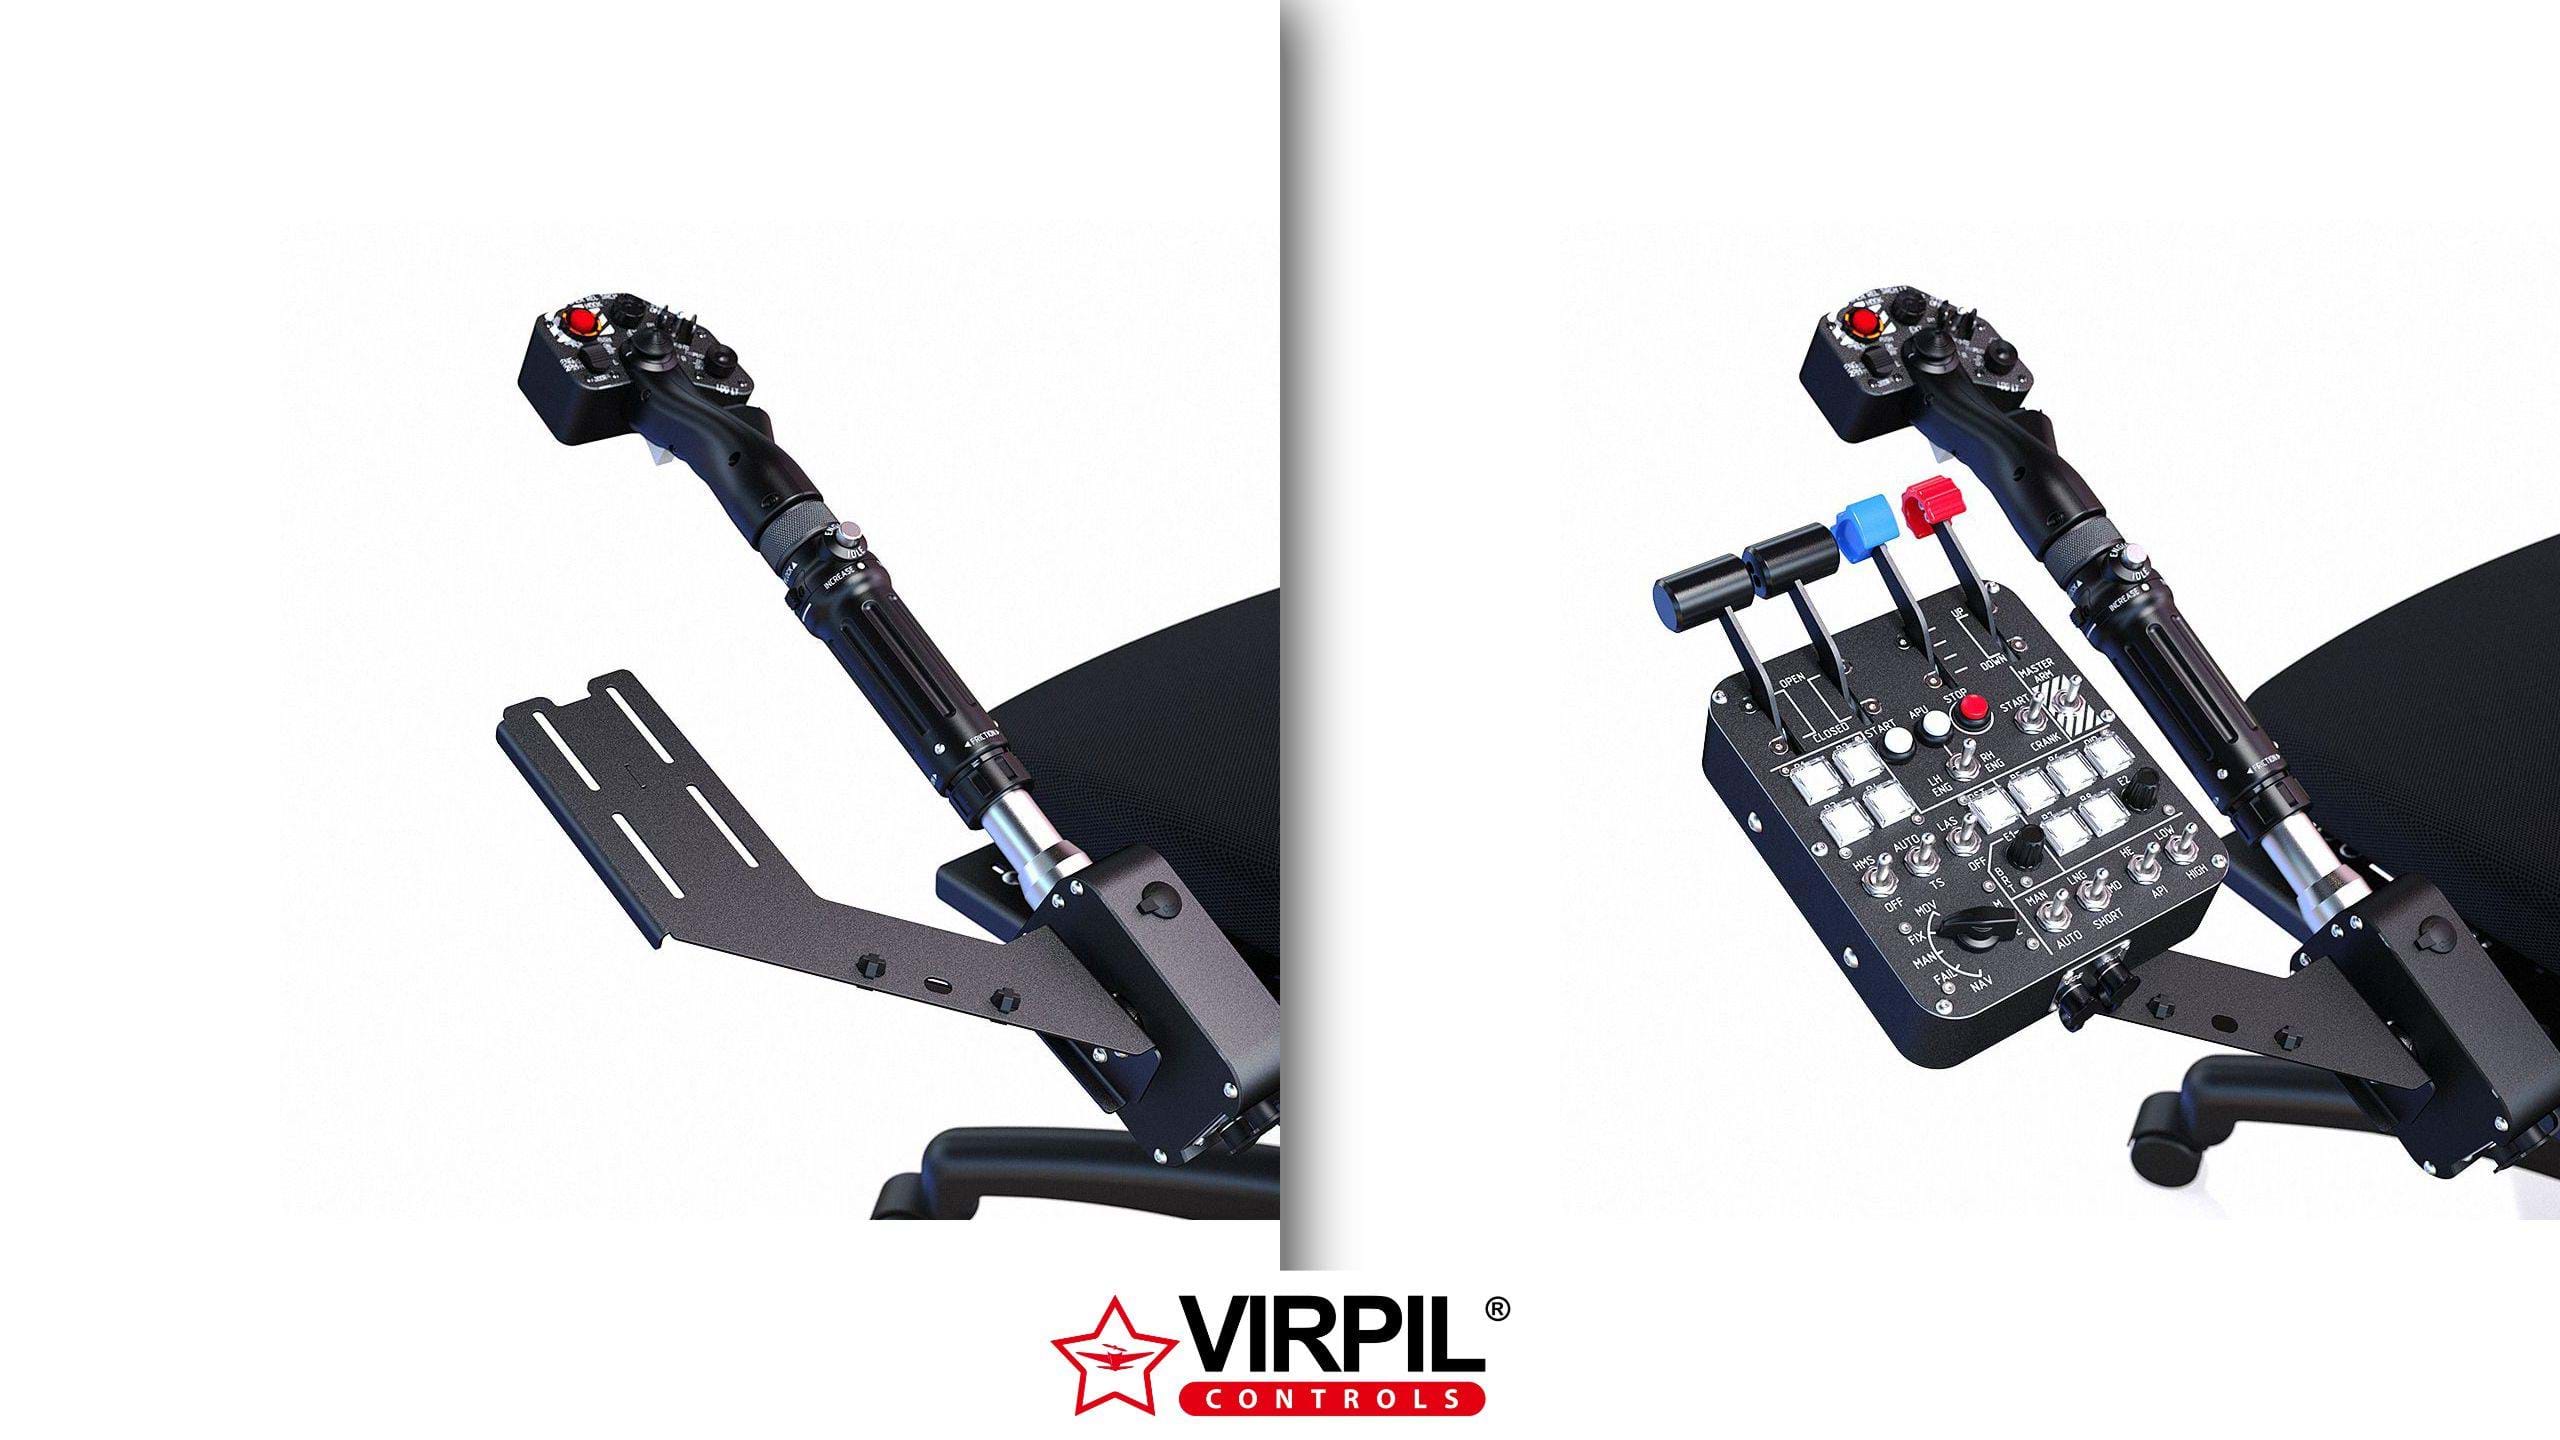 VIRPIL Released Control Panel Mount Adapter for their Collective Bases